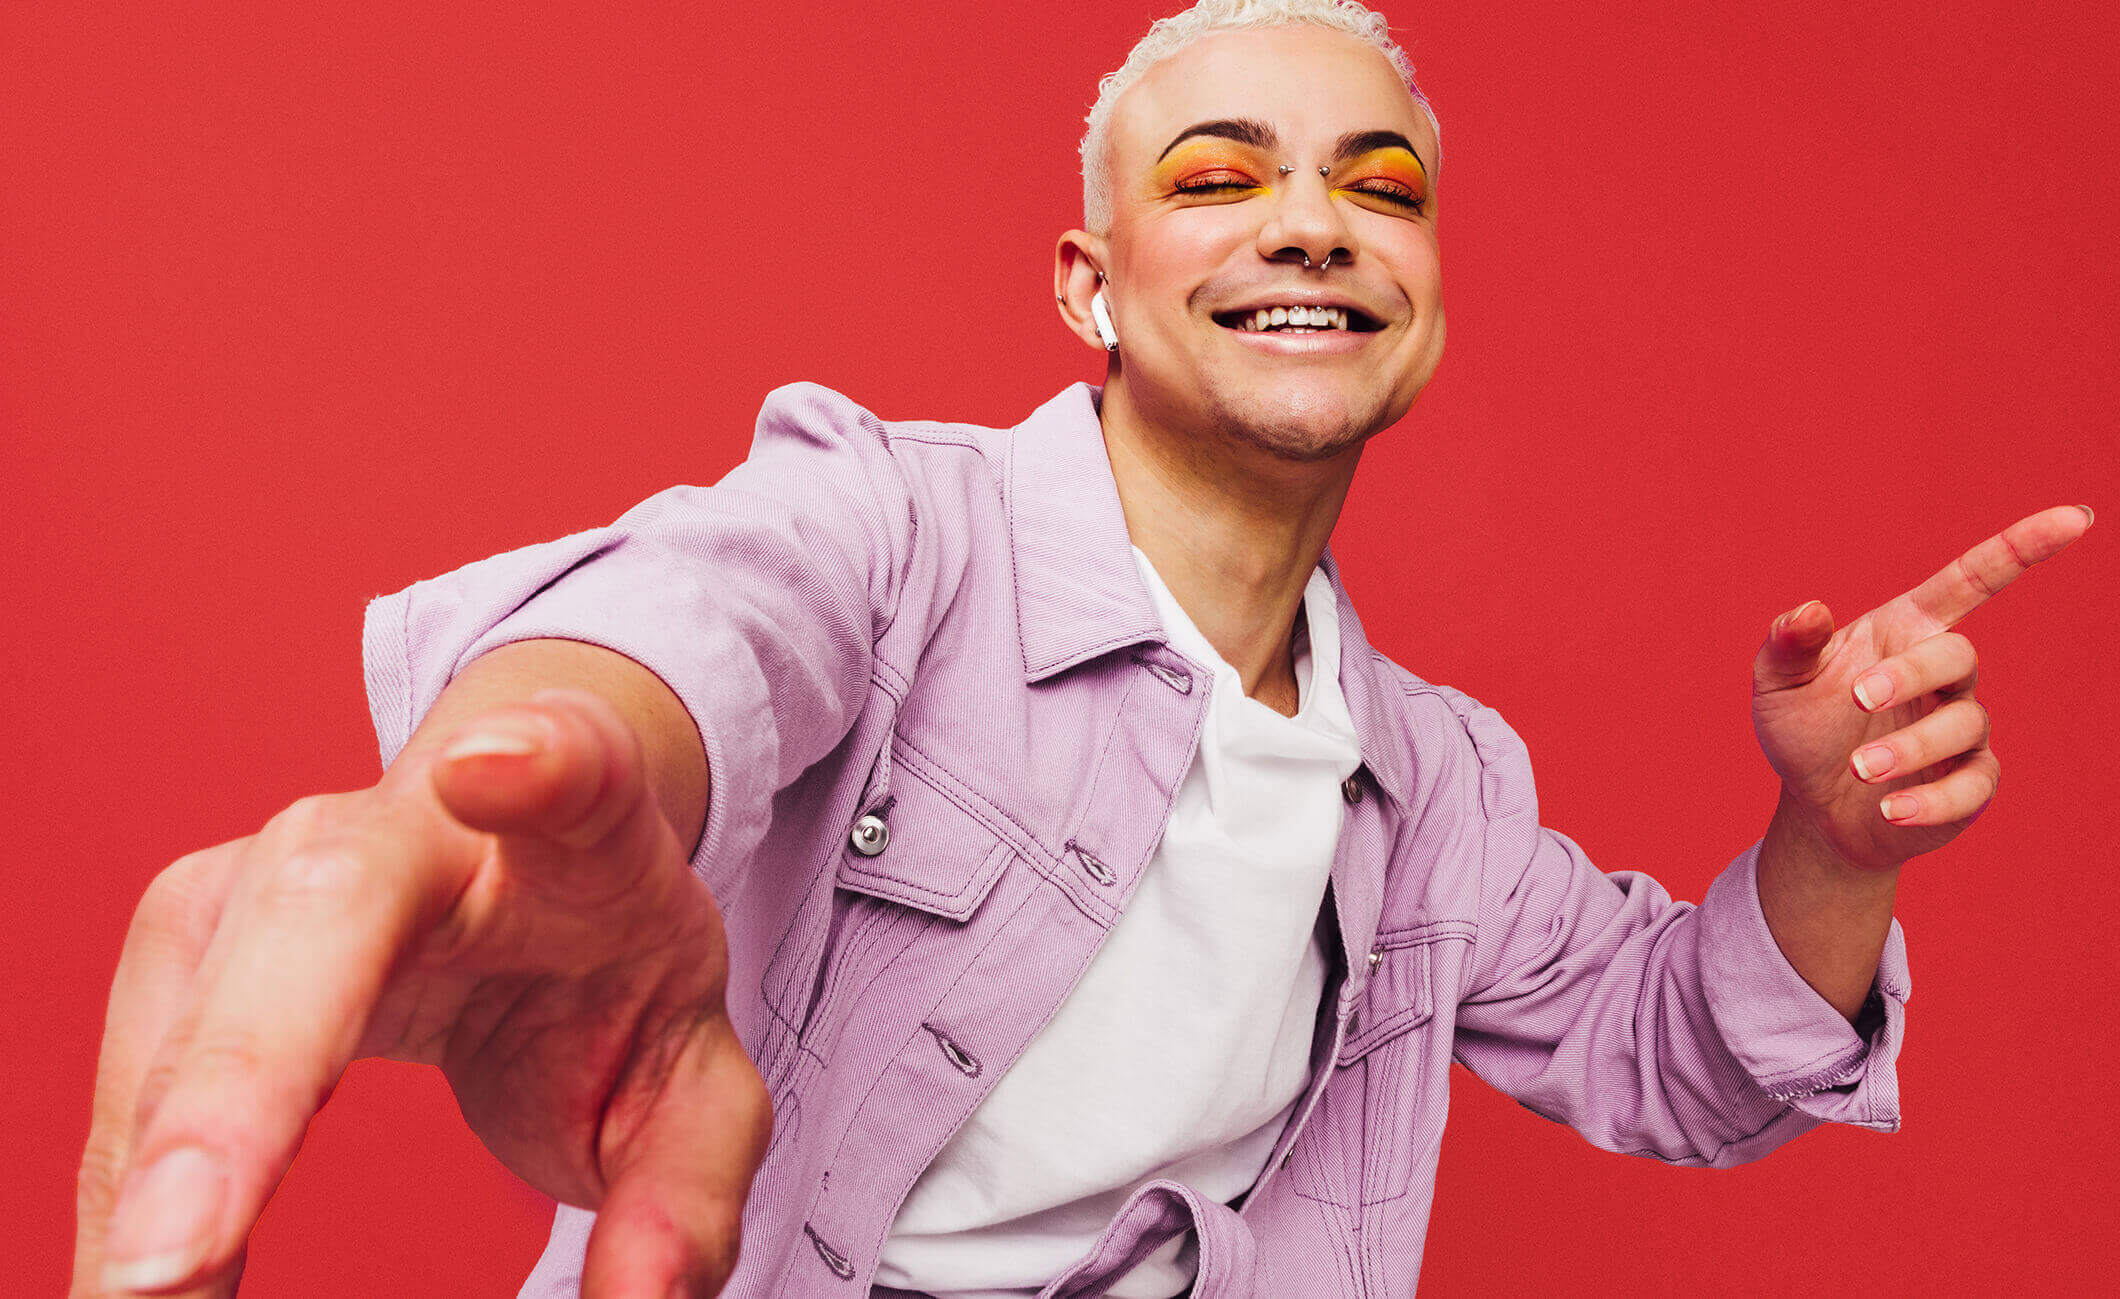 person smiling and dancing with a red background